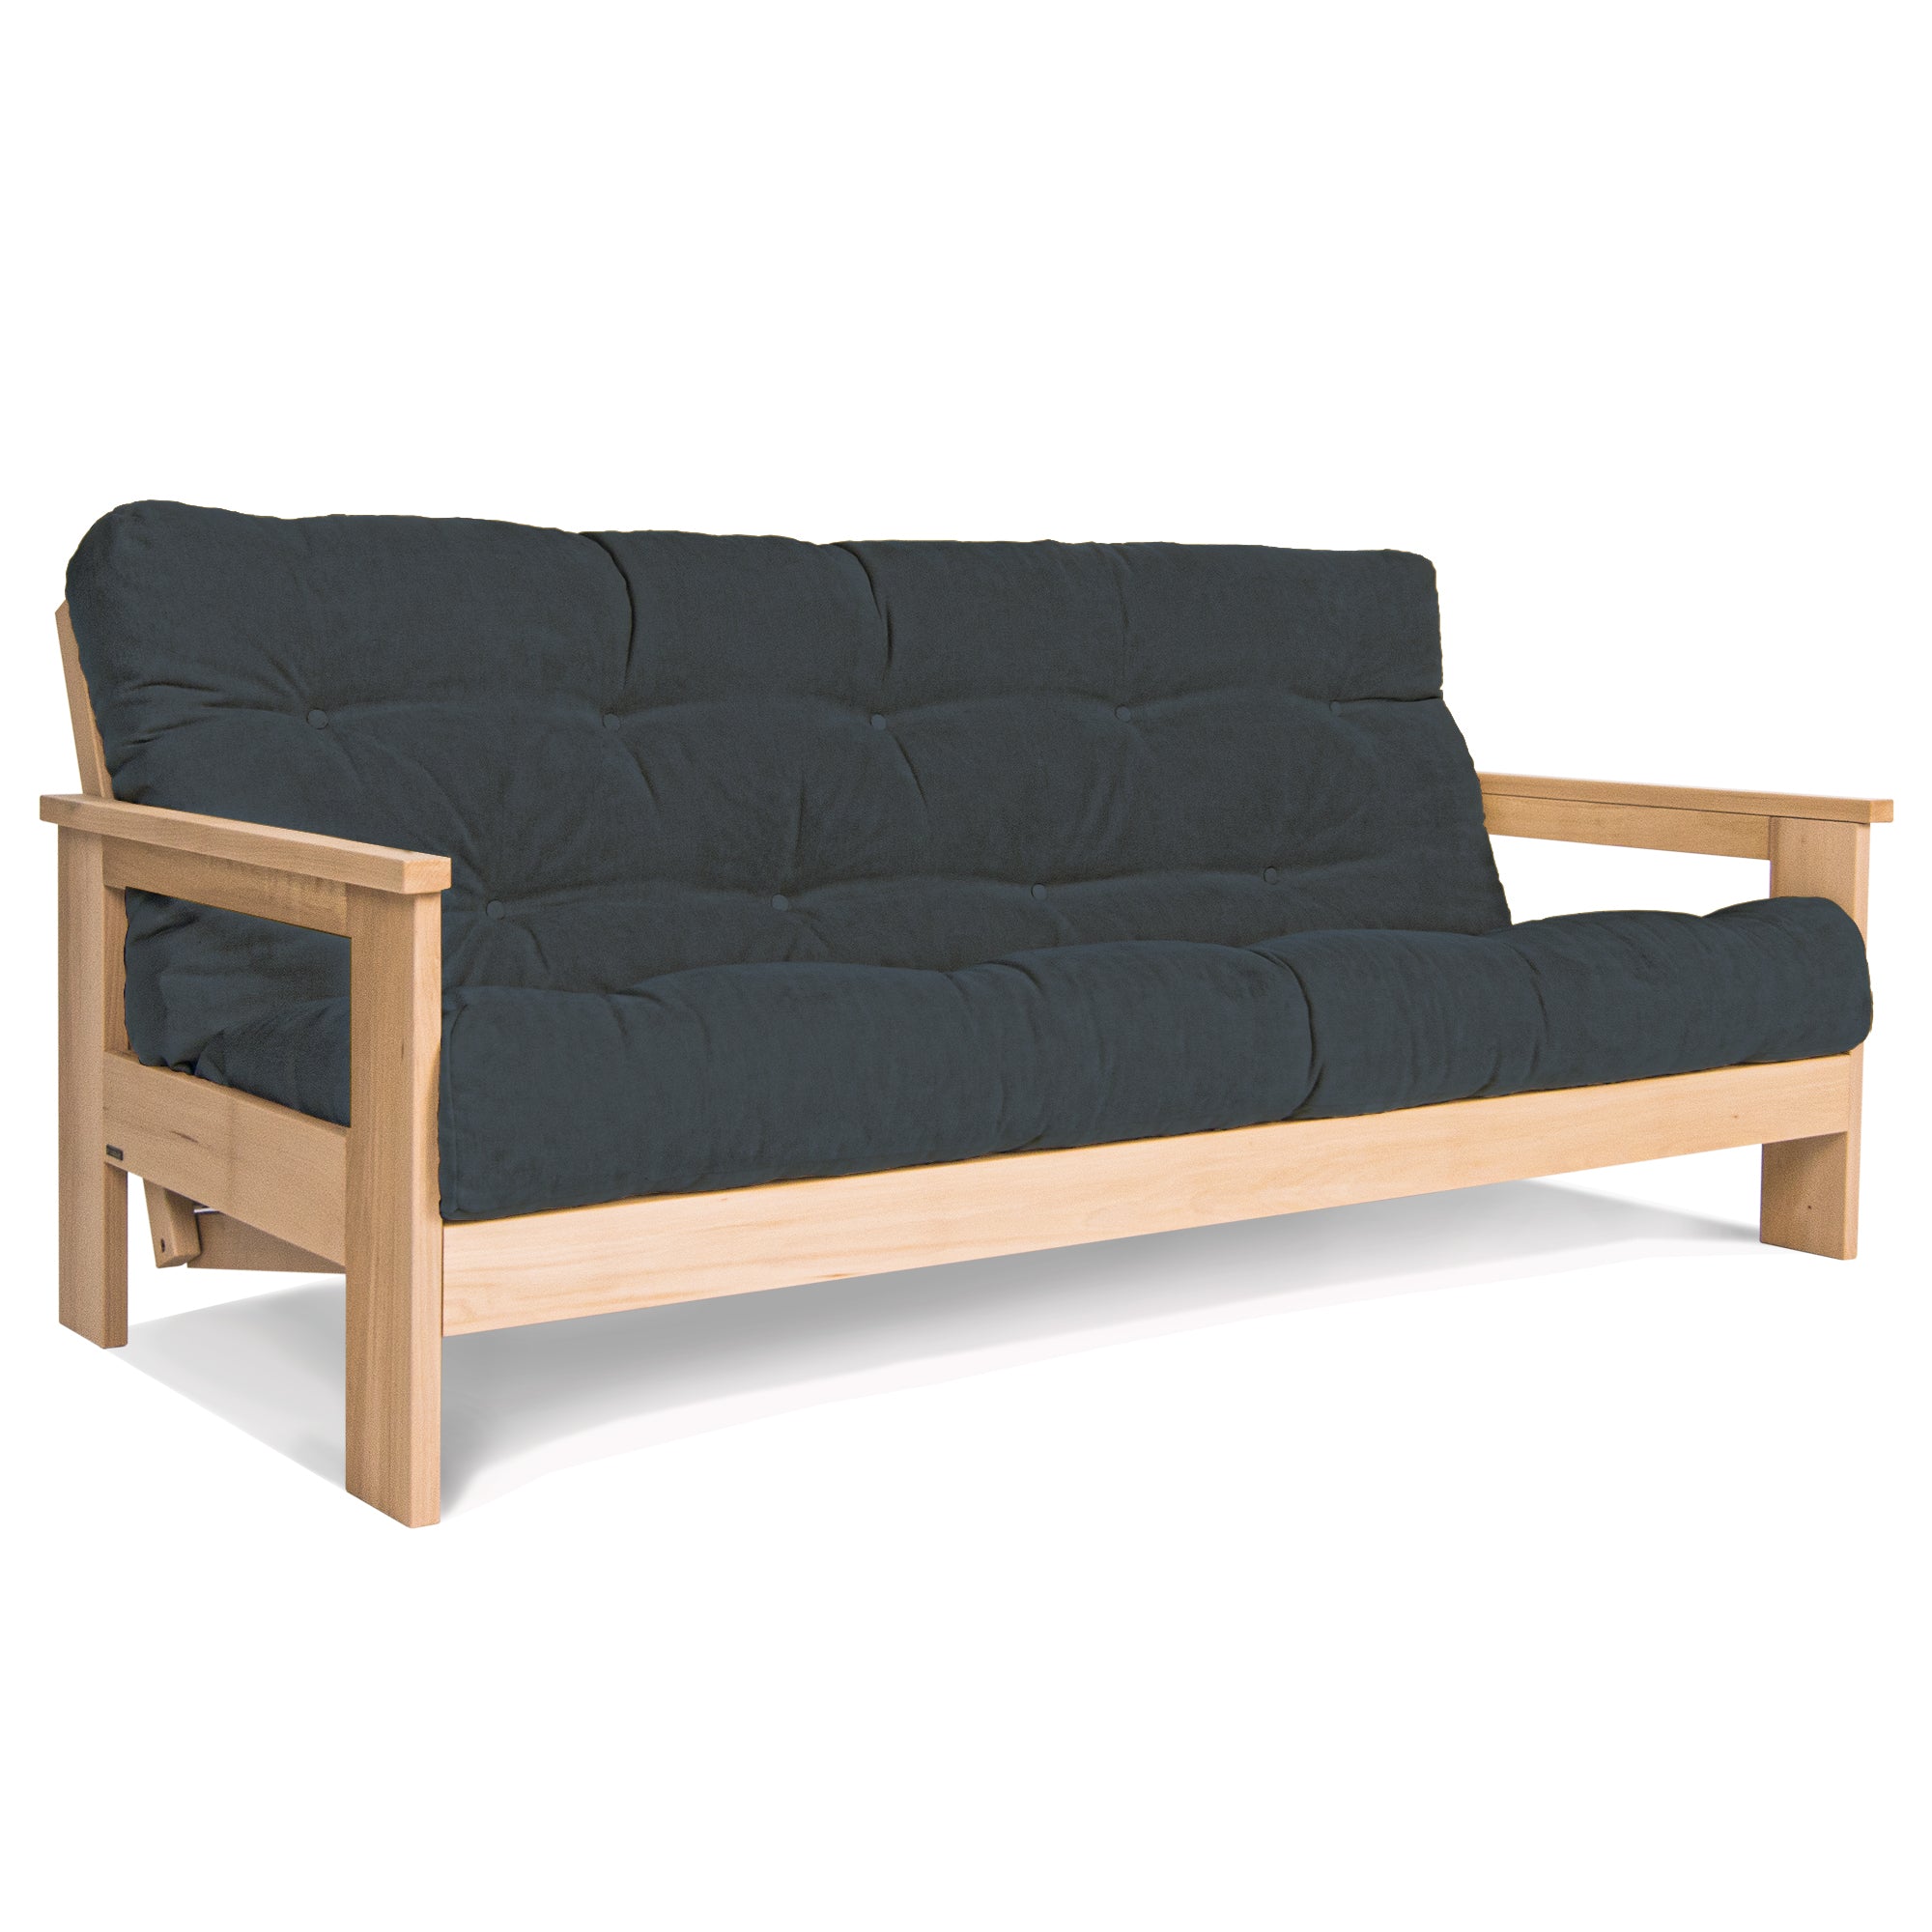 MEXICO Folding Sofa Bed-Beech Wood Frame-Natural Colour--graphite fabric